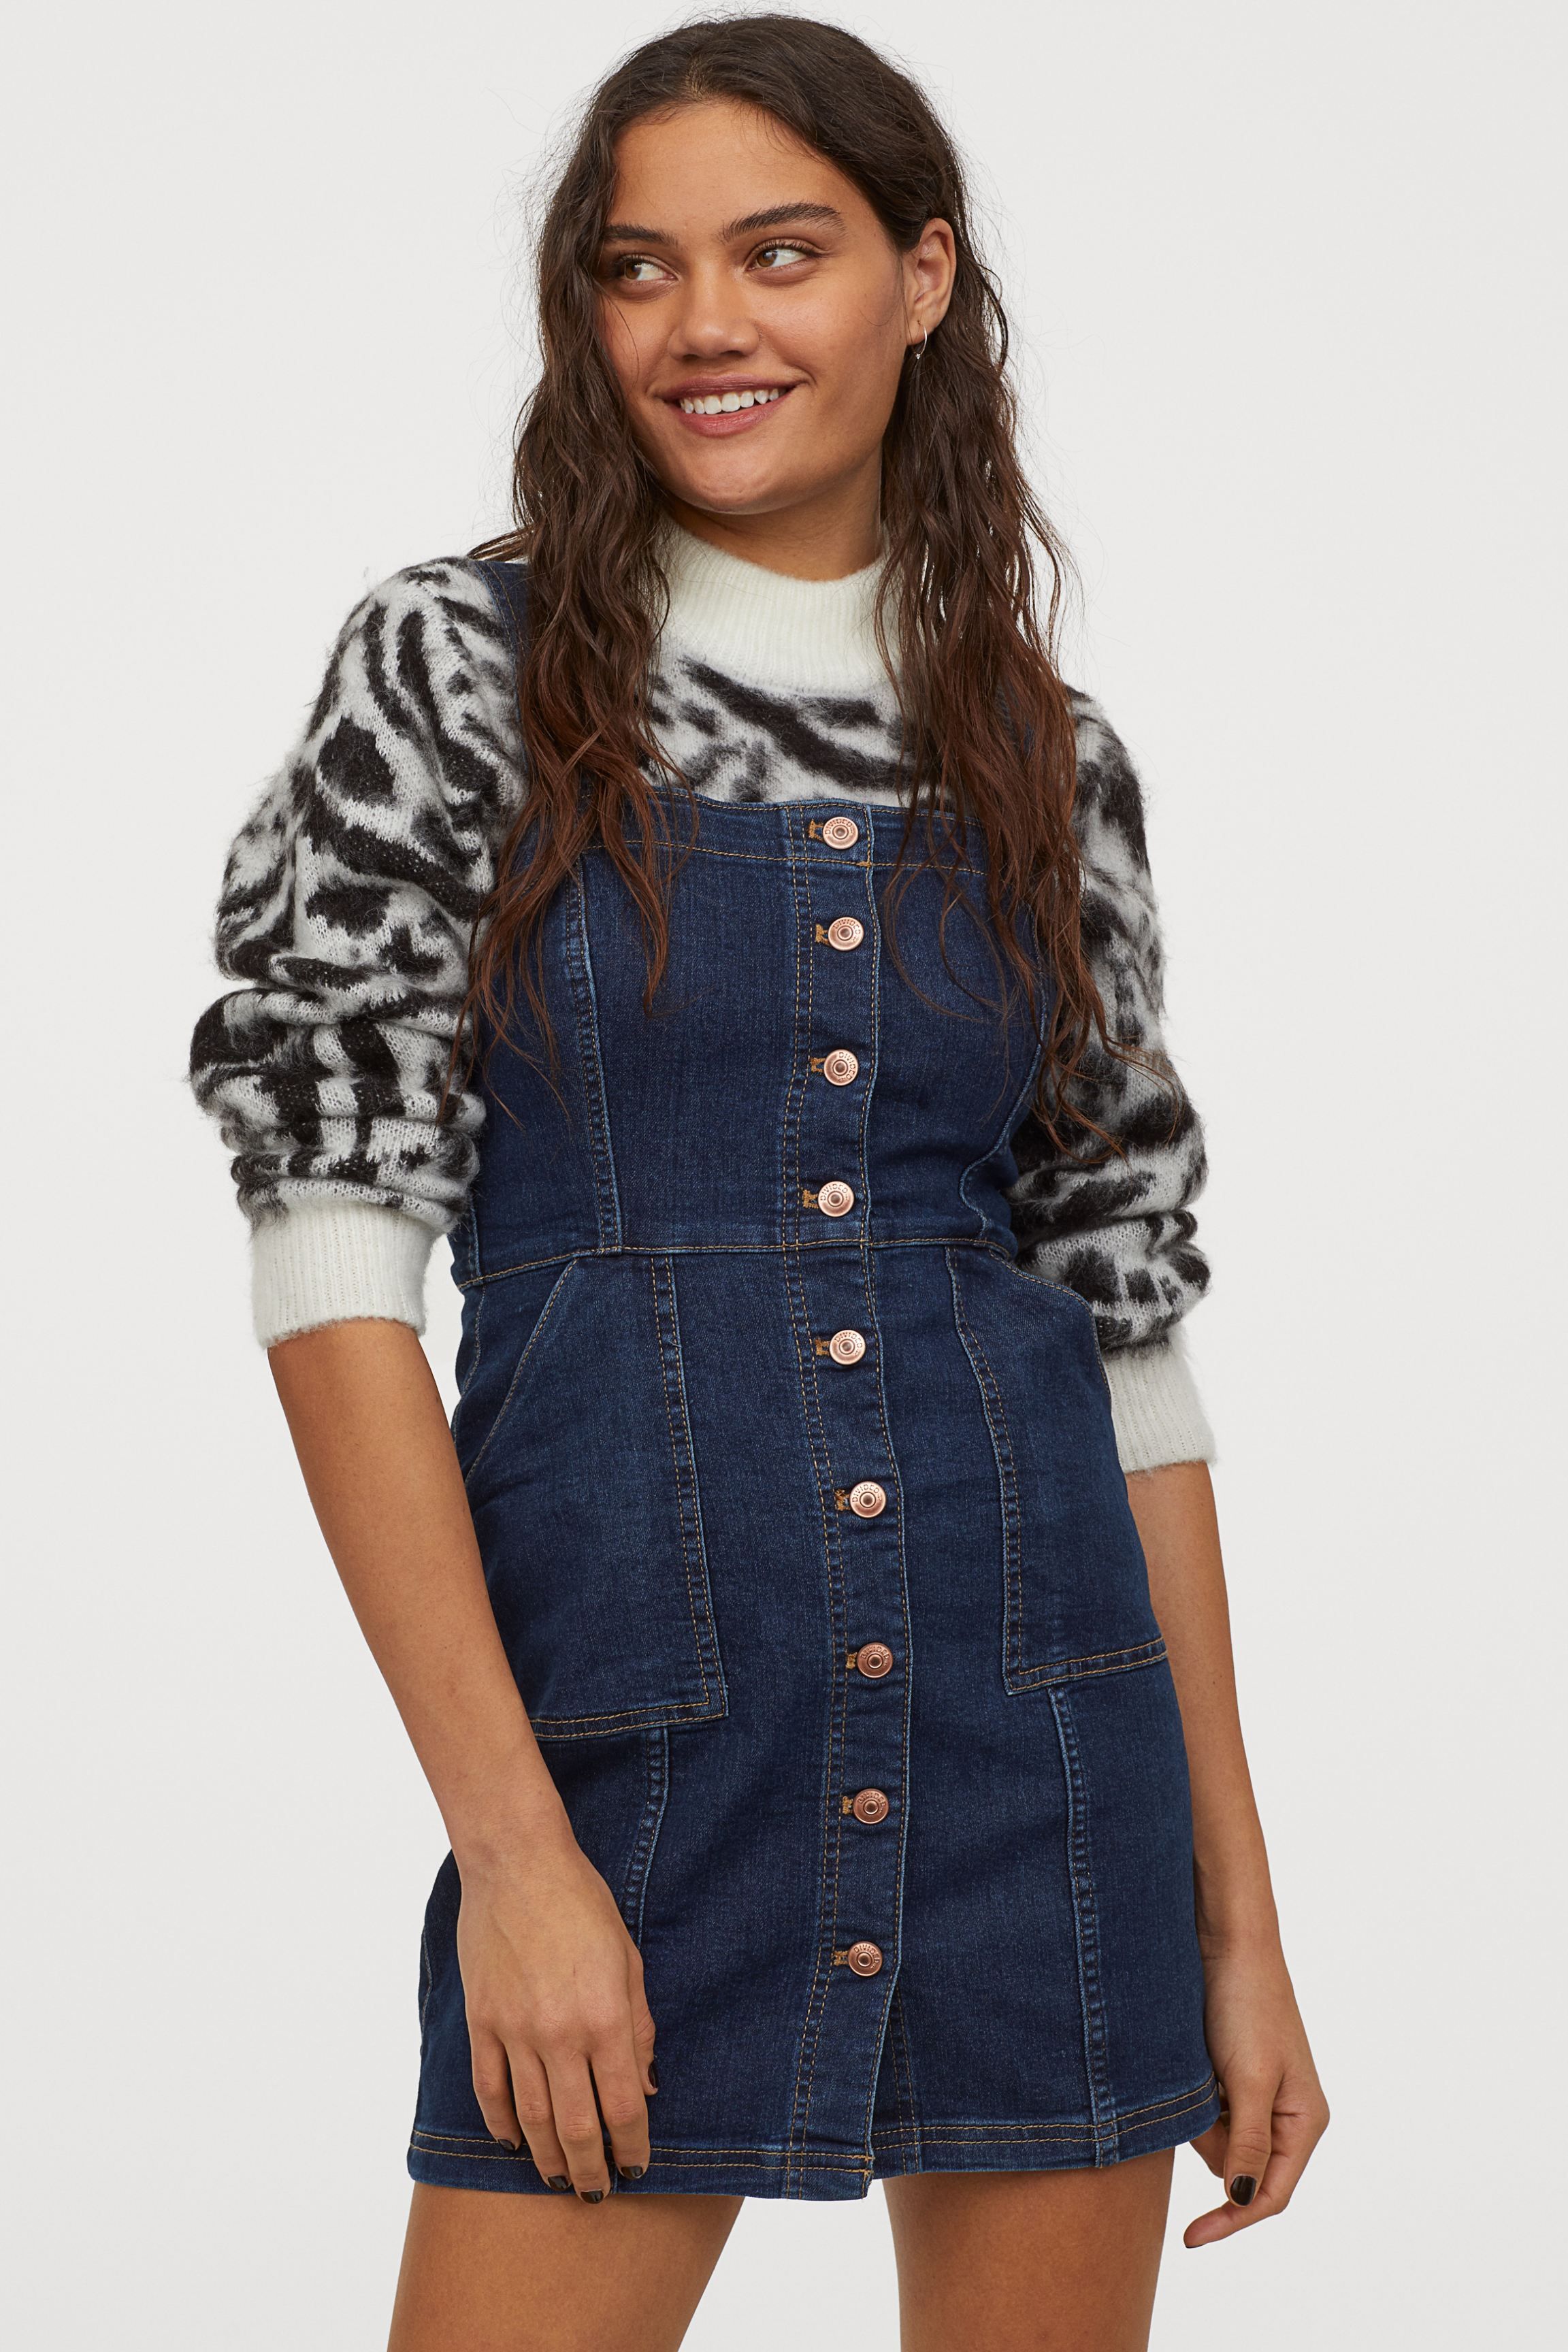 15 Ways to Wear Overalls - Overall ...